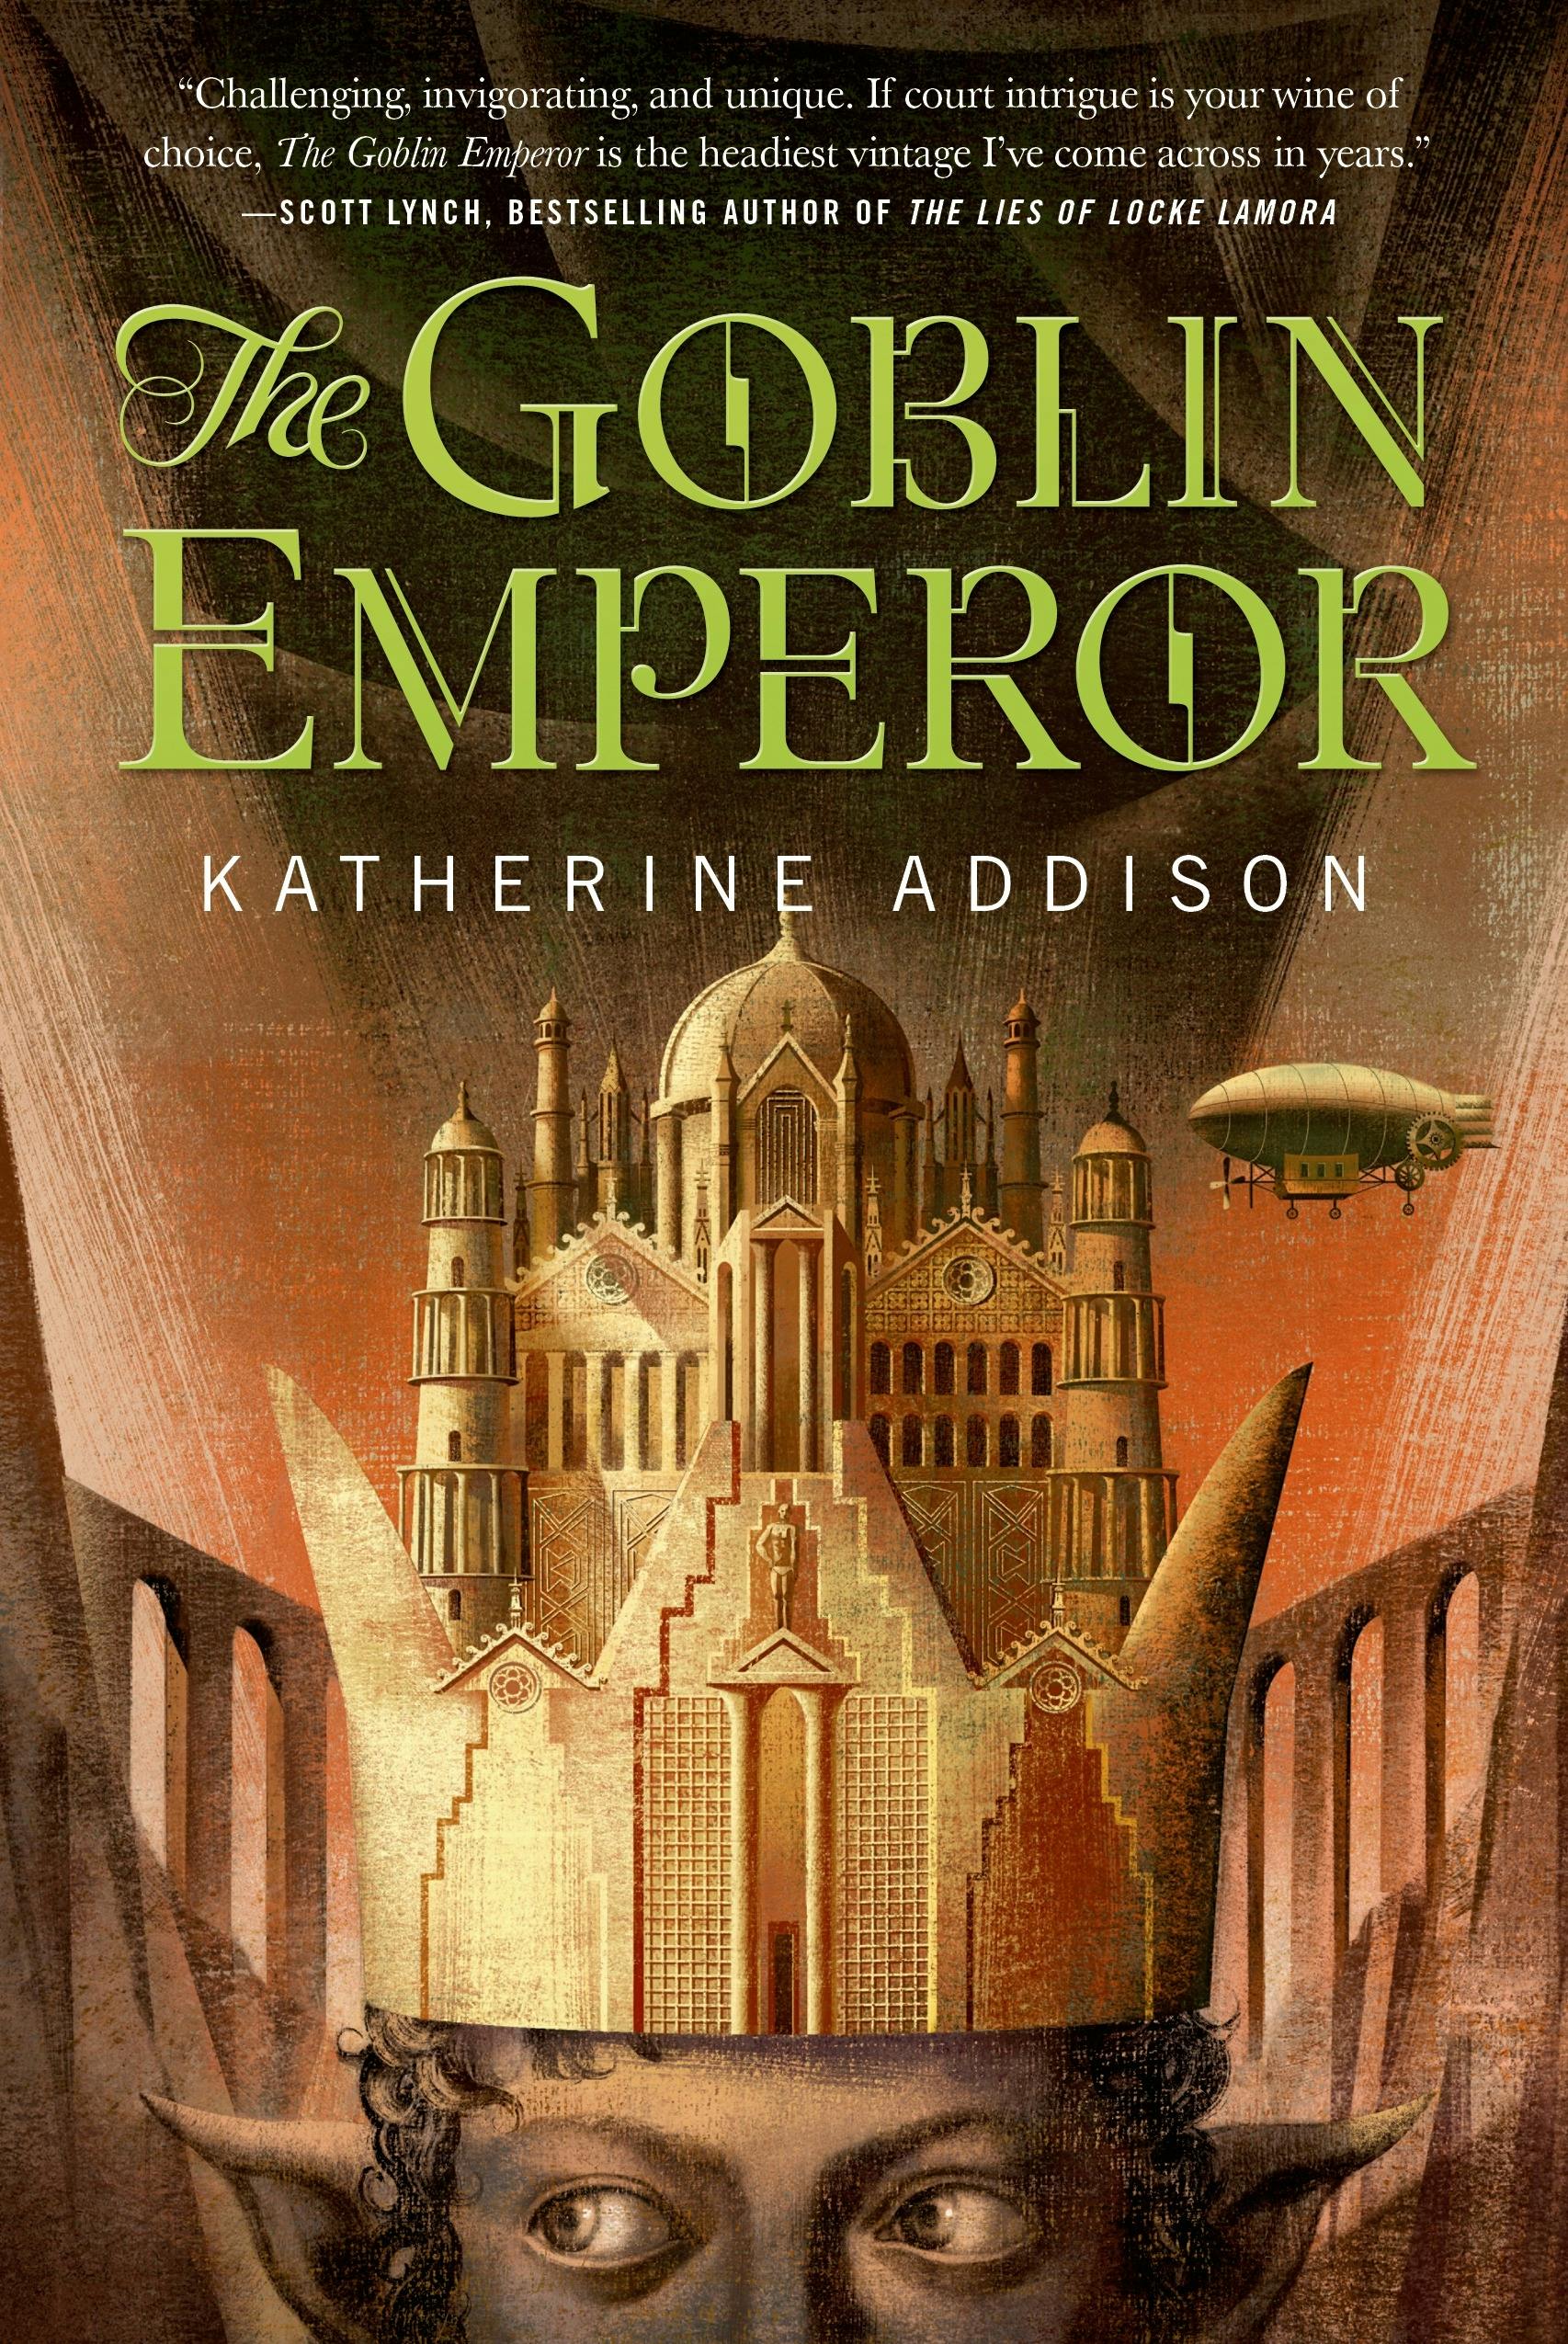 Cover for the book titled as: The Goblin Emperor